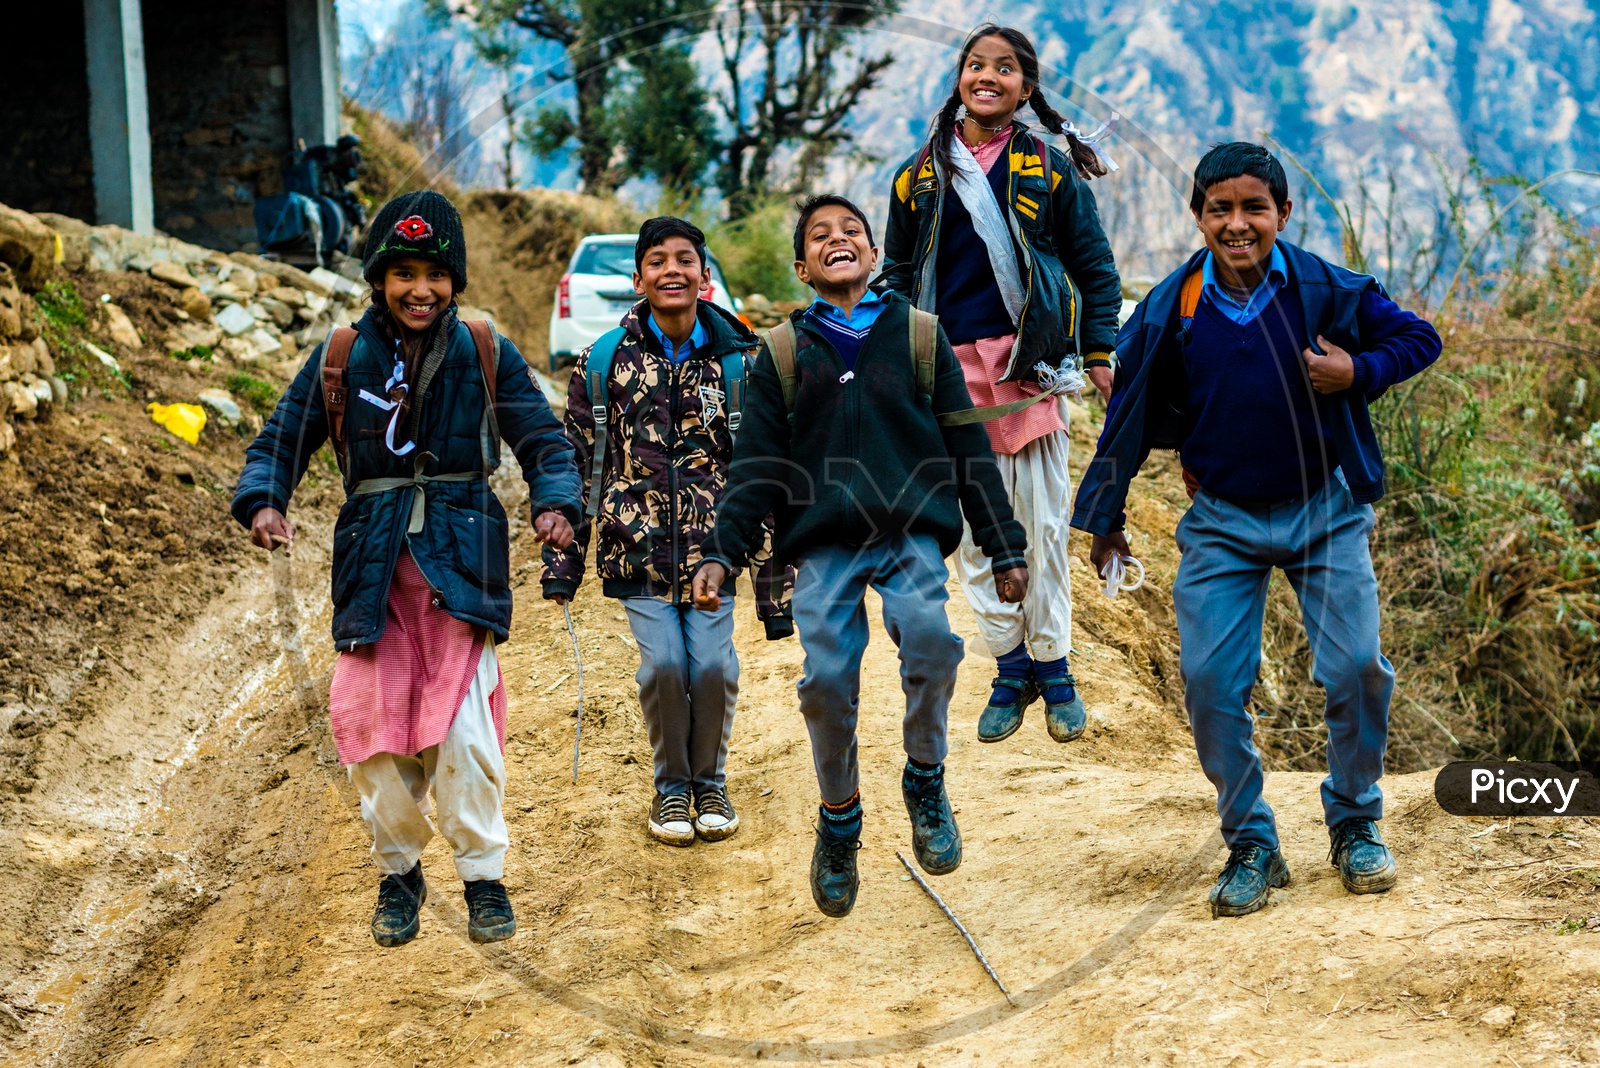 Portrait of Indian School Kids Jumping and Smiling on the Street